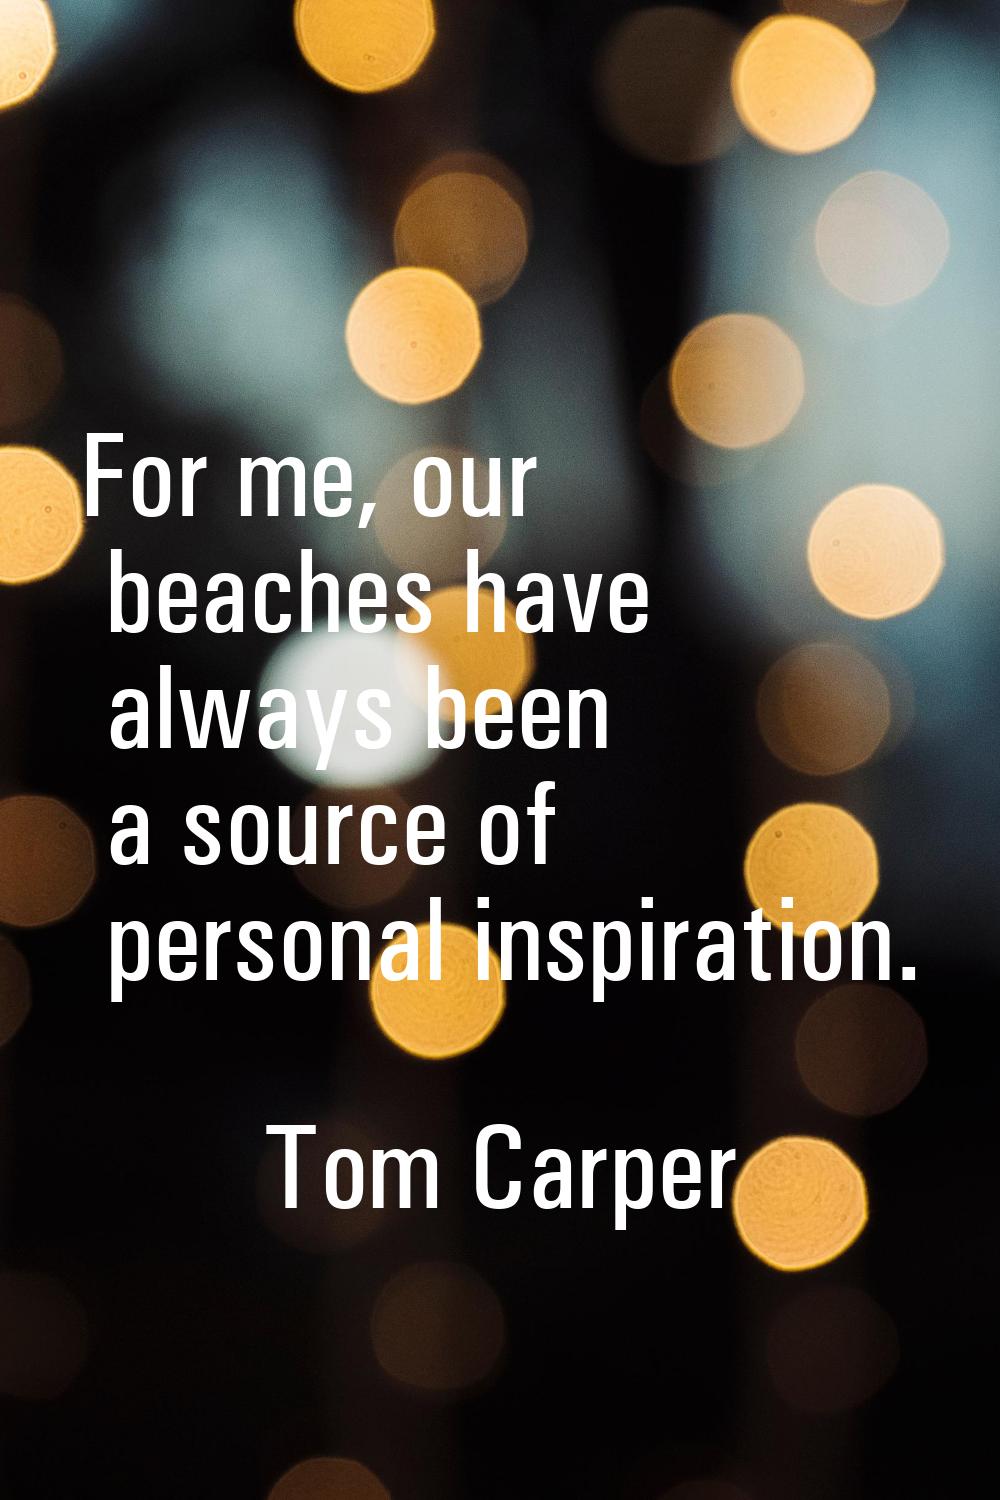 For me, our beaches have always been a source of personal inspiration.